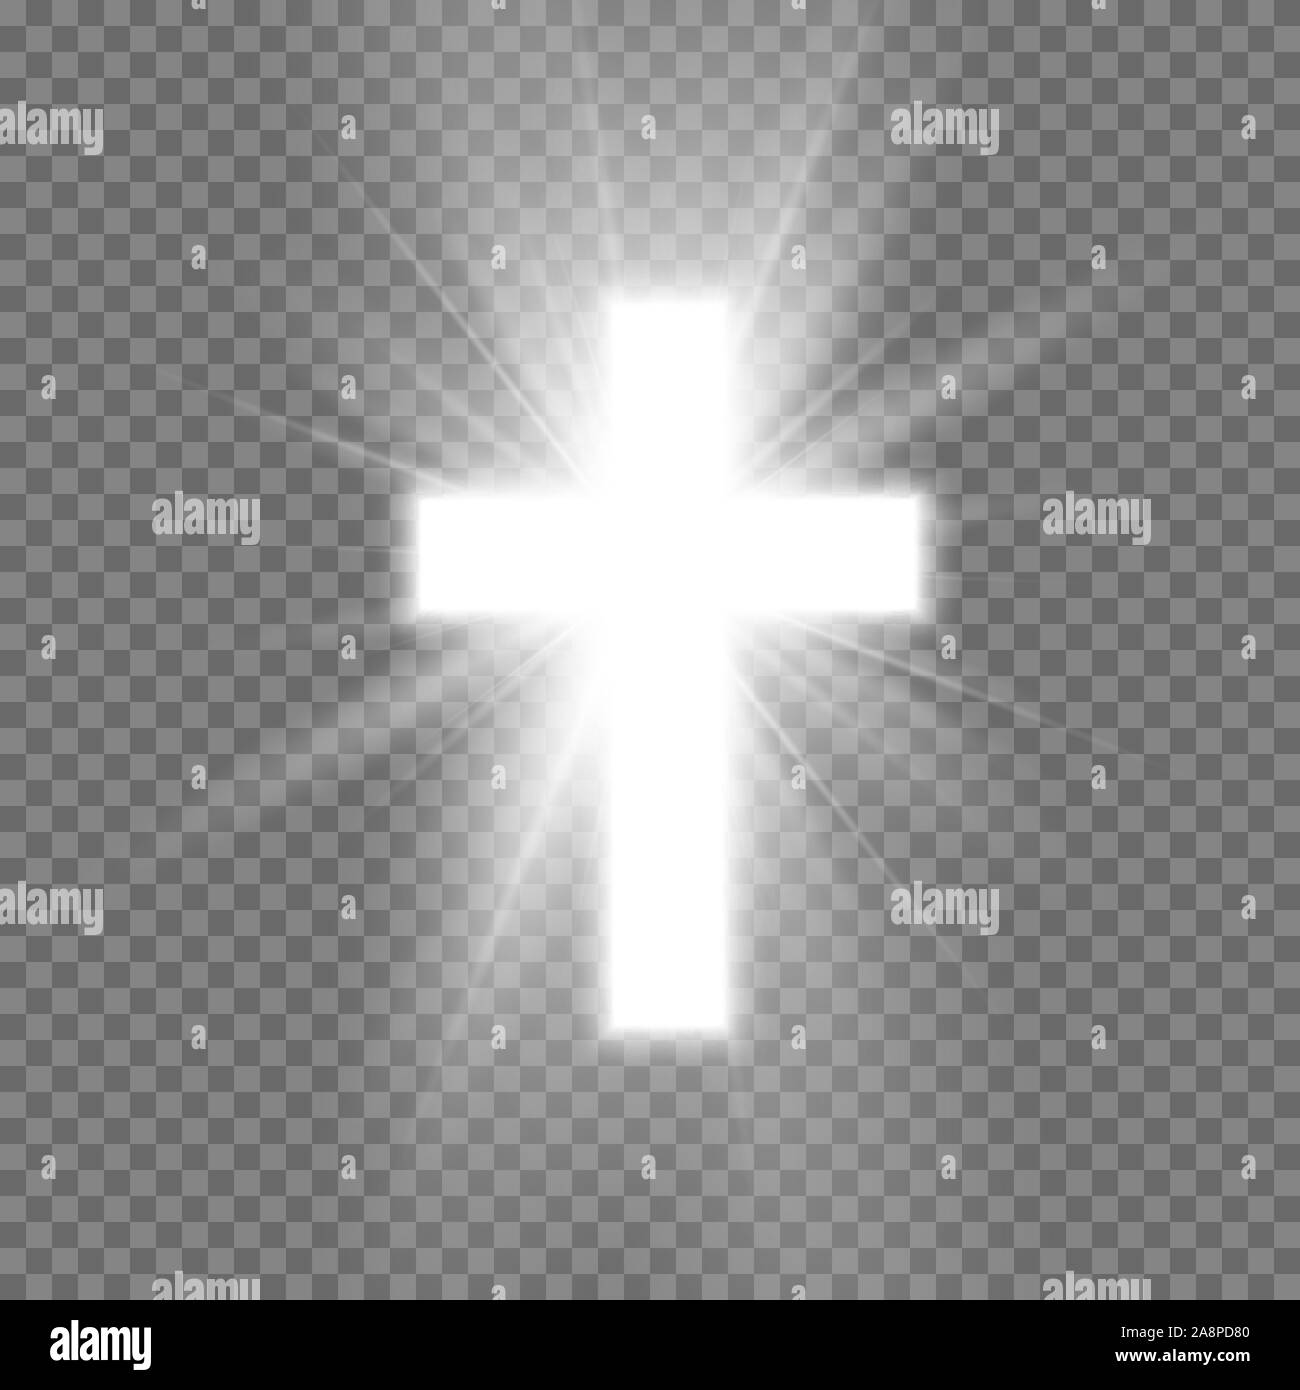 White Cross with glow symbol of christianity. Symbol of hope and faith. Vector illustration isolated on transparent background Stock Vector